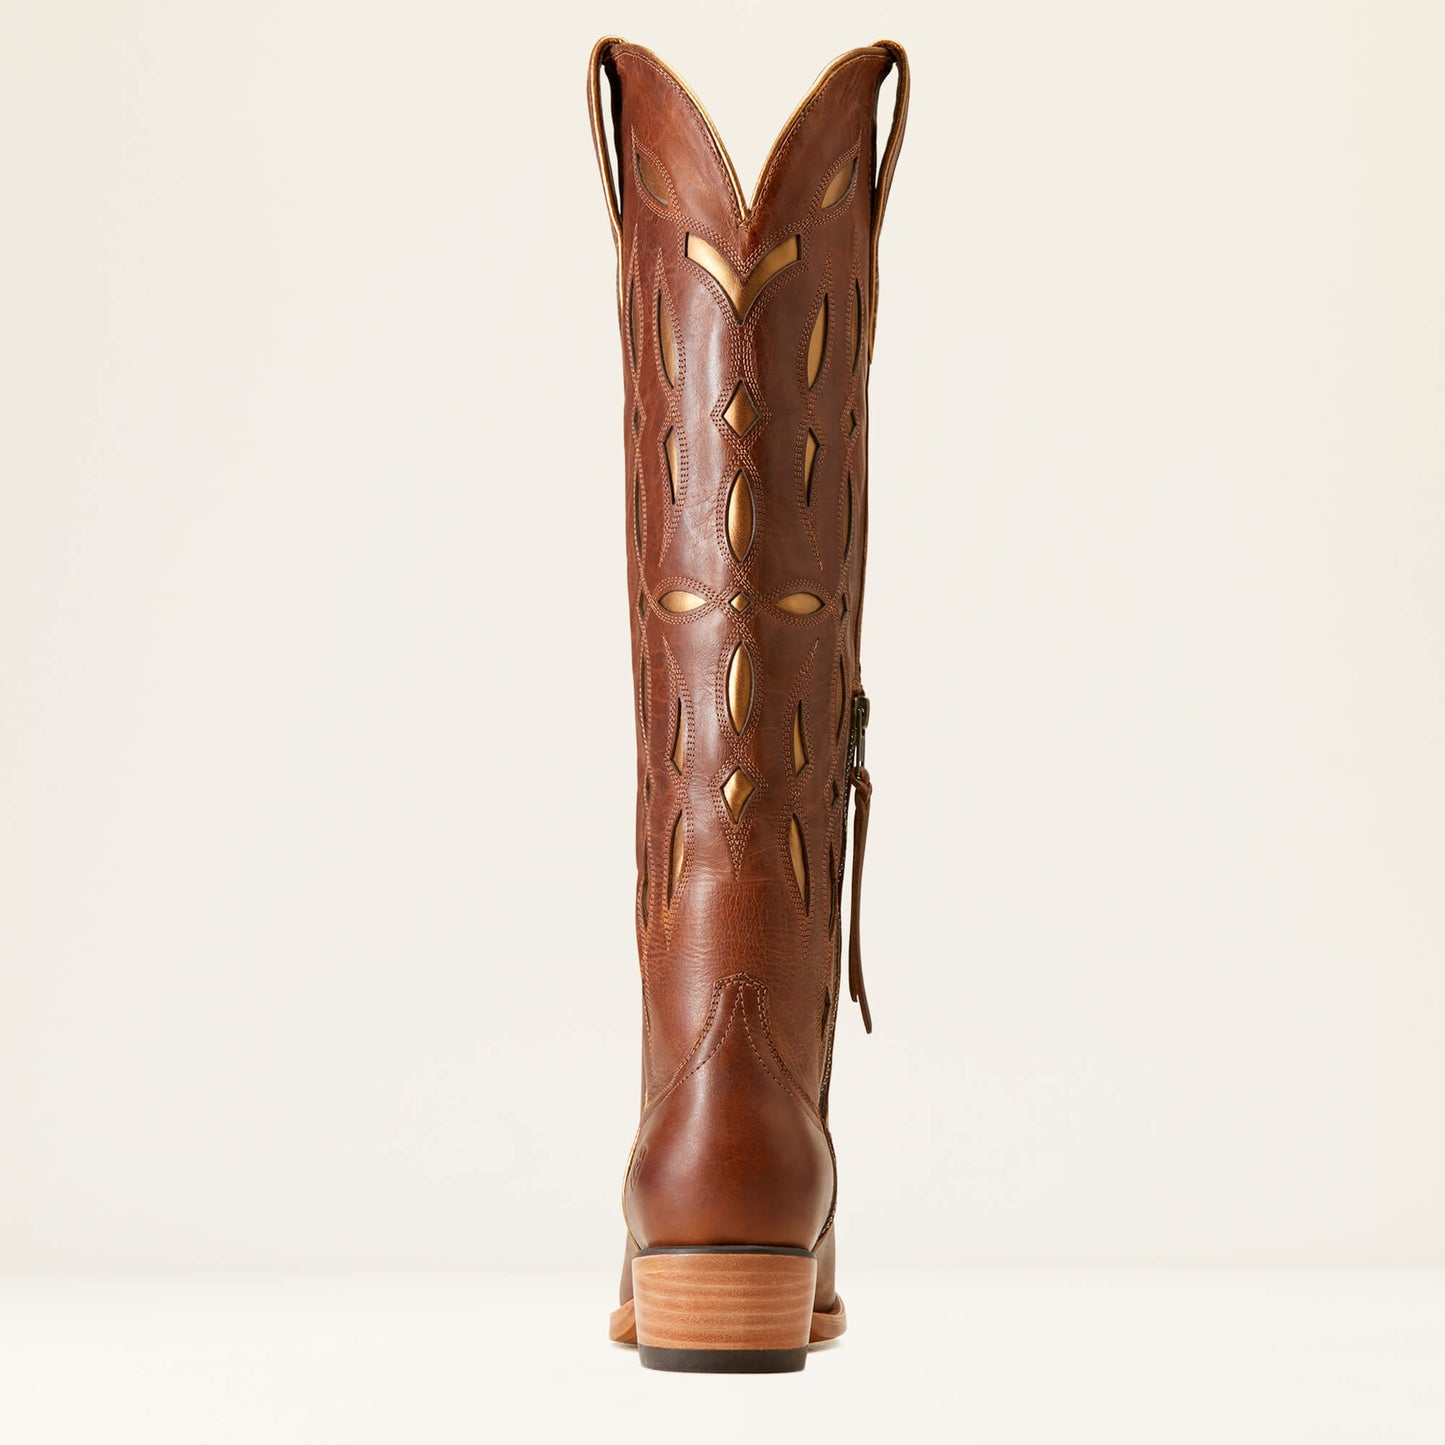 Ariat Saylor Chic Brown Boot